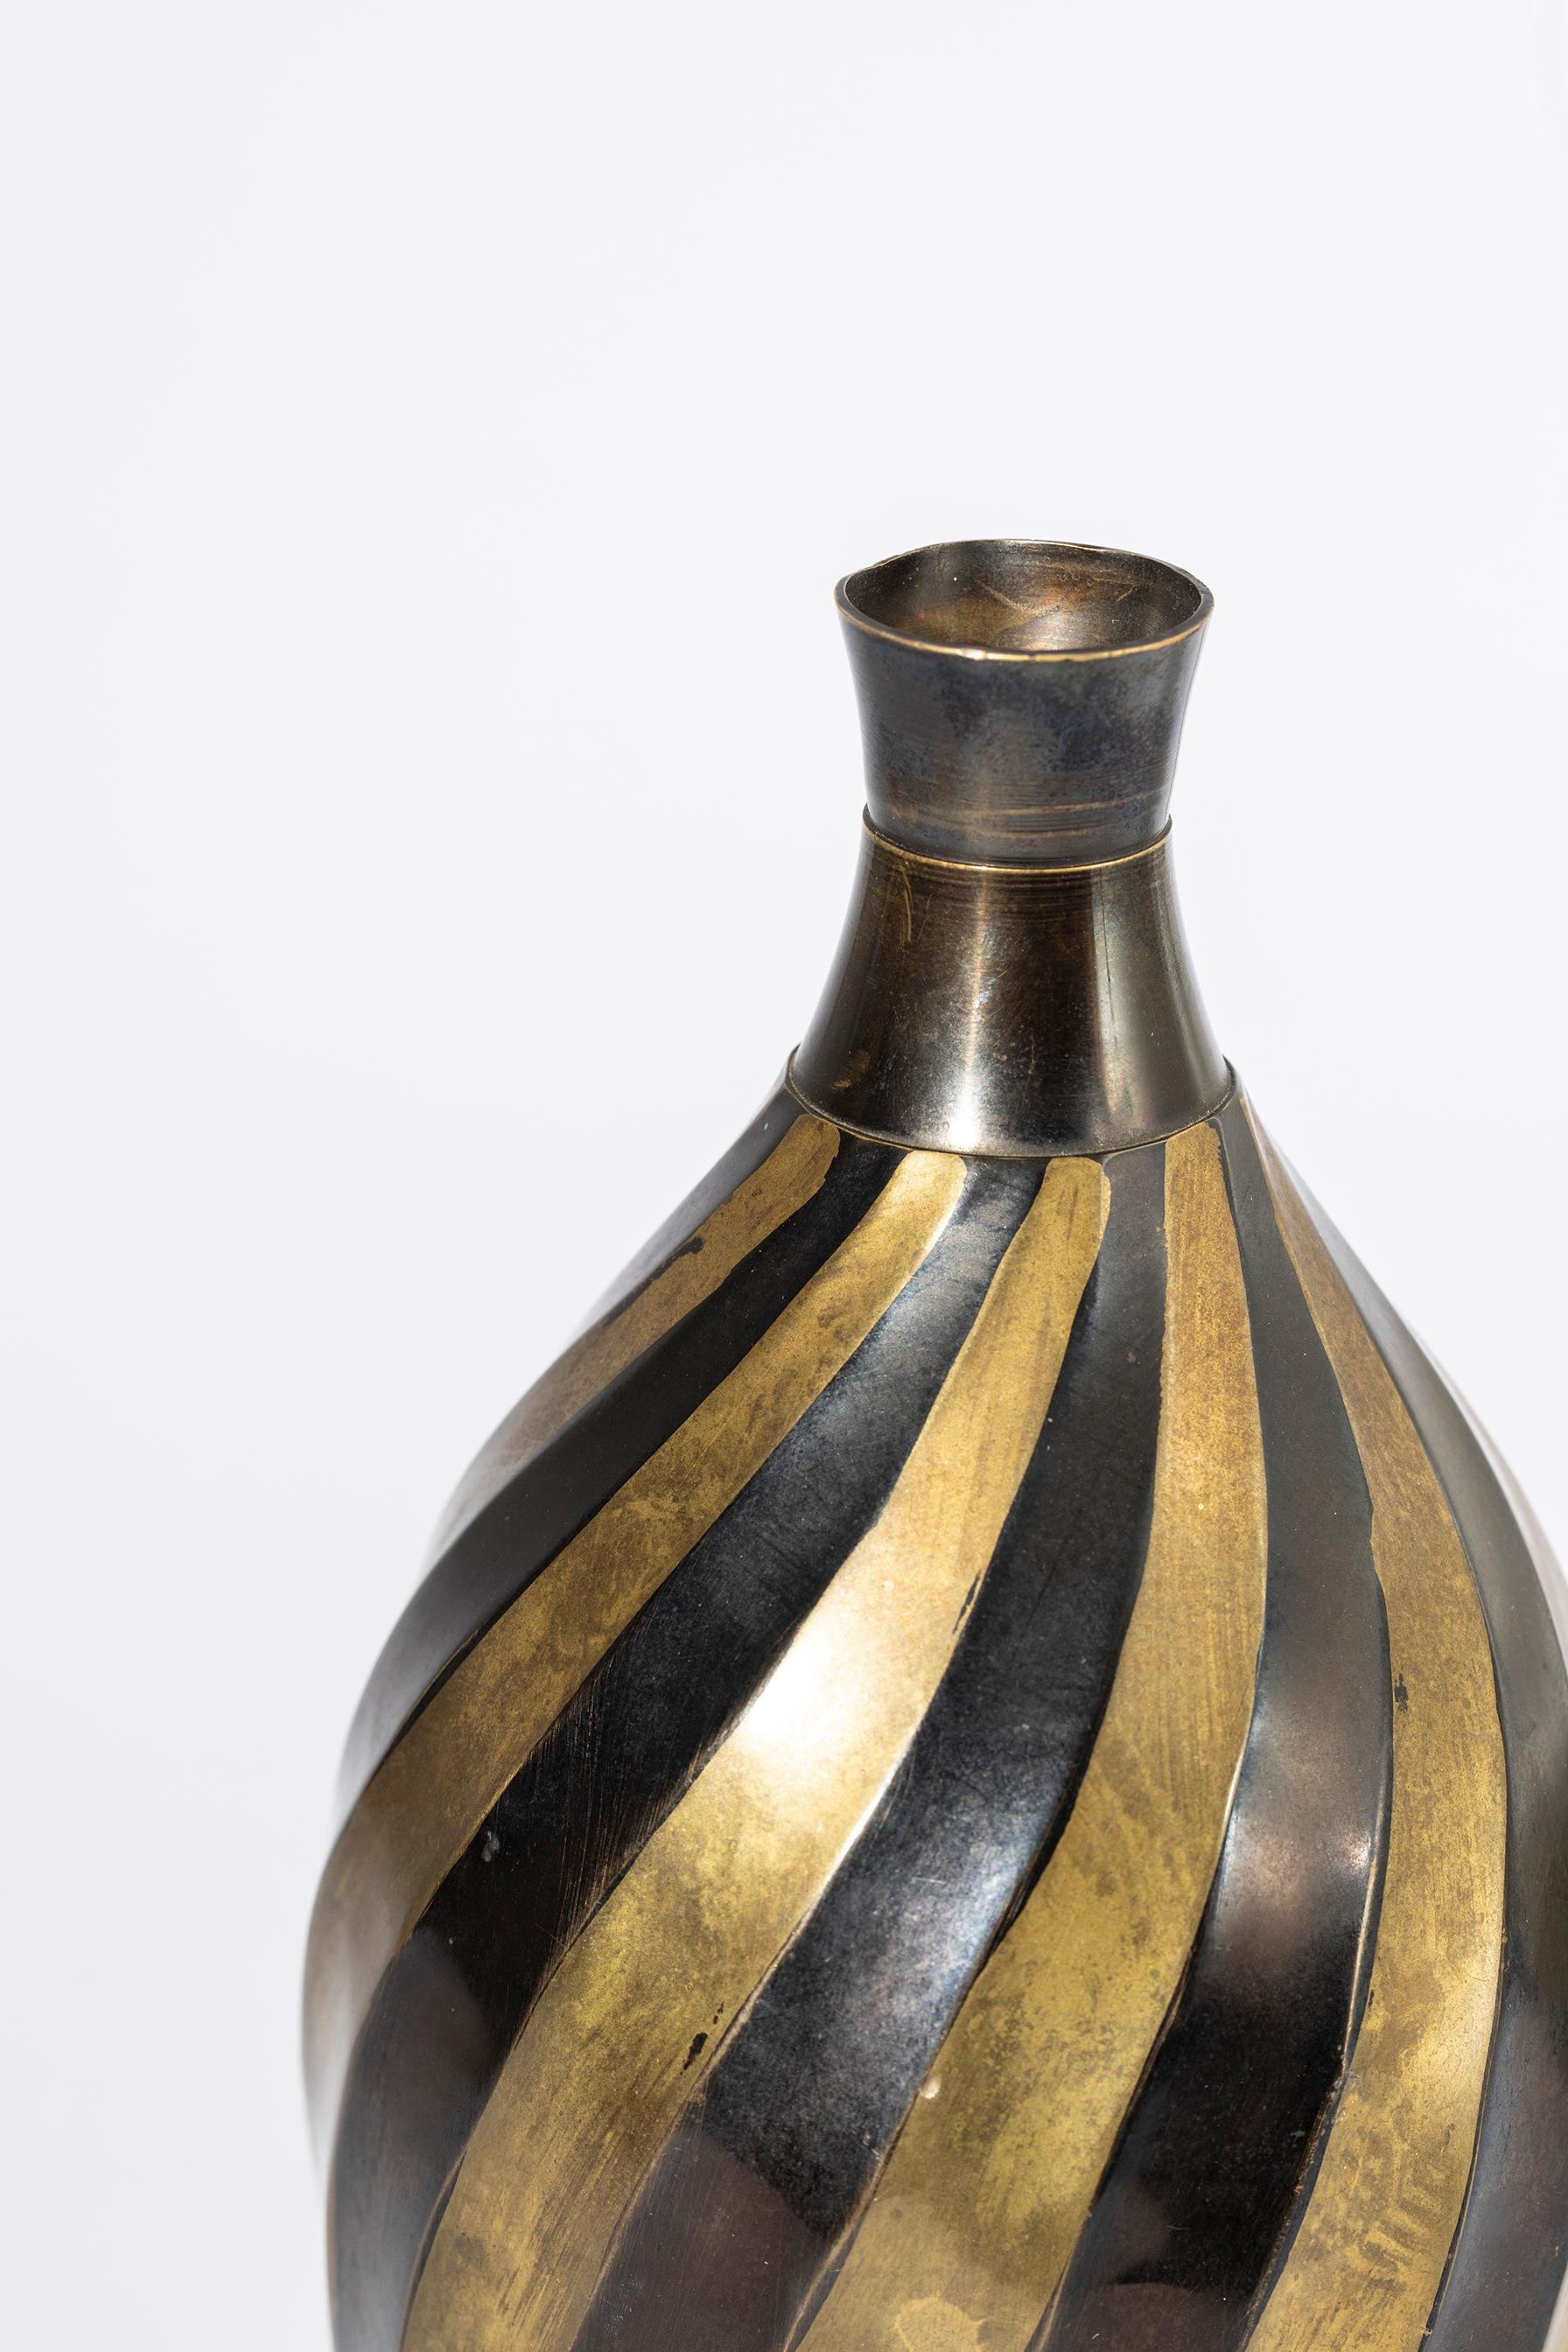 Brass vase, embossed, with alternating lozenge decoration enameled in black tone. The shape and workmanship of the geometric embossing give the vase the strength and dynamism of the deco style. 